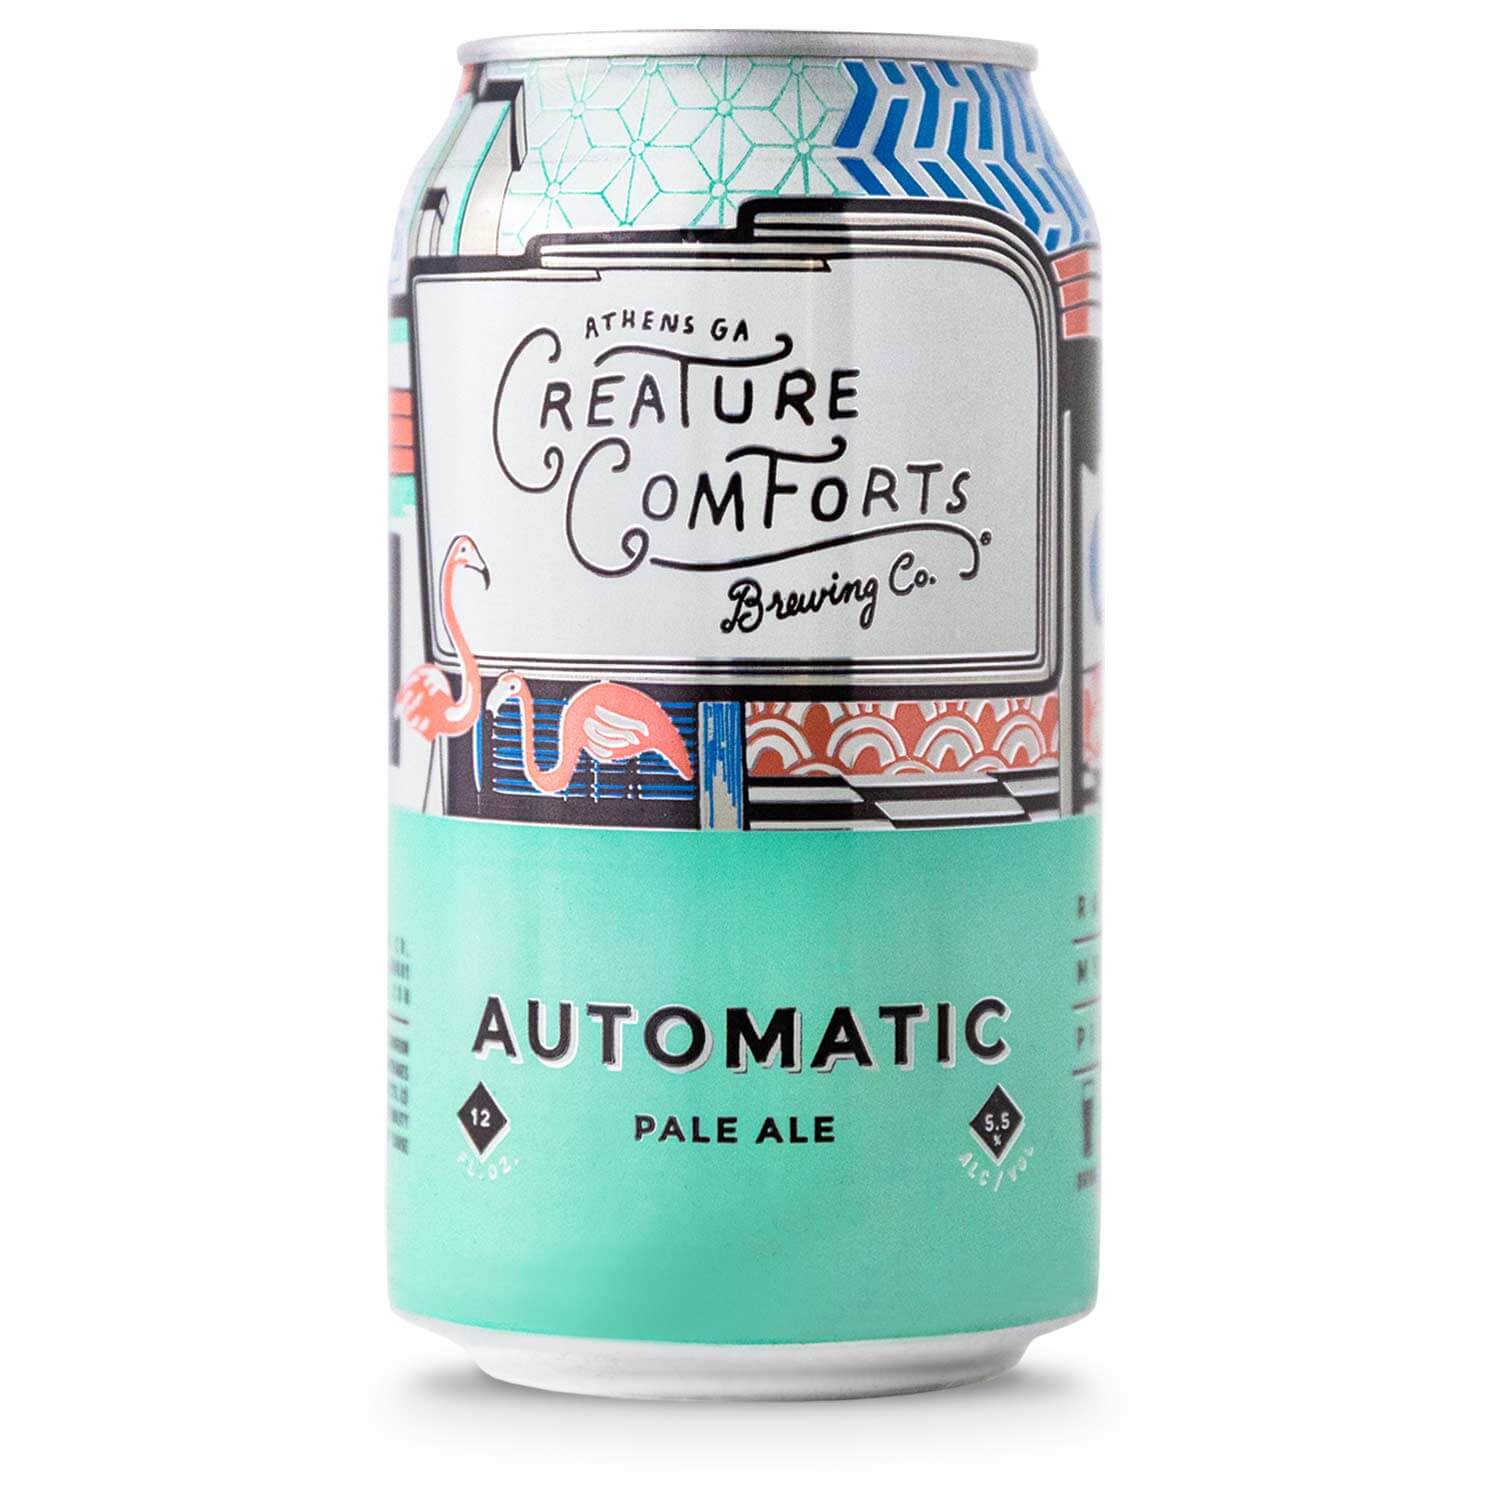 Creature Comforts Brewing Co's {"id":146,"brewery_id":31,"name":"Automatic","image":"automatic.jpeg","slug":"creature-comforts-brewing-co\/automatic","calories":null,"abv":"5.5","ibu":null,"type":"Ale","style":"Pale Ale","description":null,"available":"All Year","created_at":null,"updated_at":null,"brewery":{"id":31,"user_id":null,"name":"Creature Comforts Brewing Co","slug":null,"logo":null,"description":"Every company should have a plan to support the city they love. For us, this plan takes the form of our three community initiatives. Get Comfortable is designed to address our city\u2019s most pressing needs; Get Artistic works to empower local artists; Brew For One is a chance to do for one what we wish we could do for everyone.","website":"https:\/\/creaturecomfortsbeer.com\/","address":"271 W. Hancock Ave.<br>Athens, GA 30601","facebook_url":null,"twitter_url":null,"instagram_url":null,"created_at":null,"updated_at":null}}